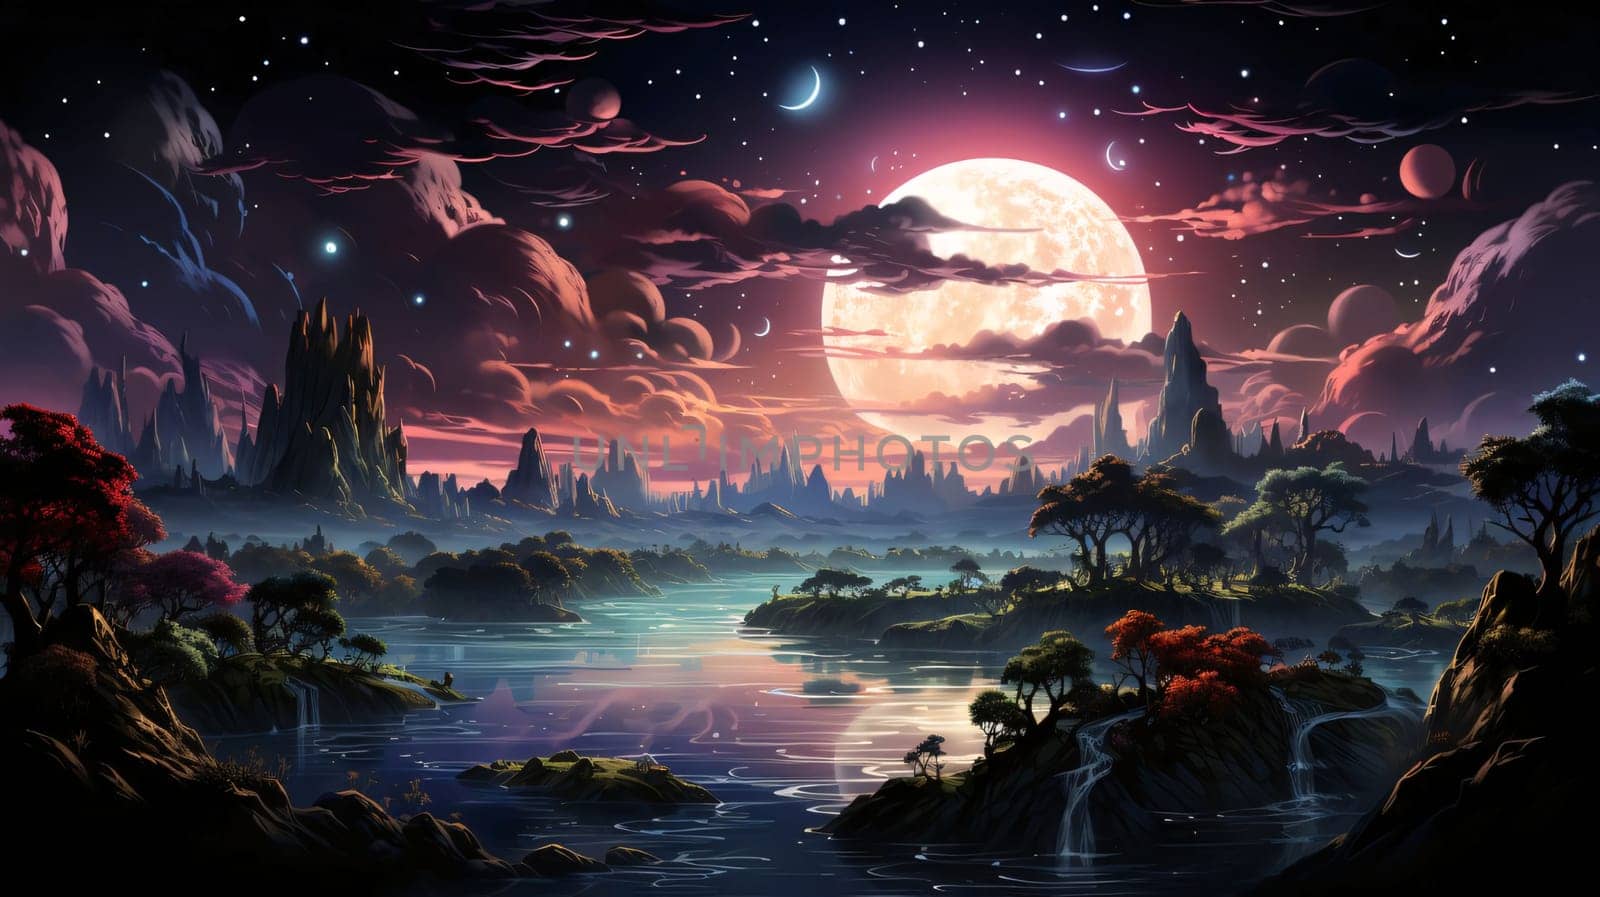 Fantasy landscape with a full moon in the night sky. Vector illustration. by ThemesS